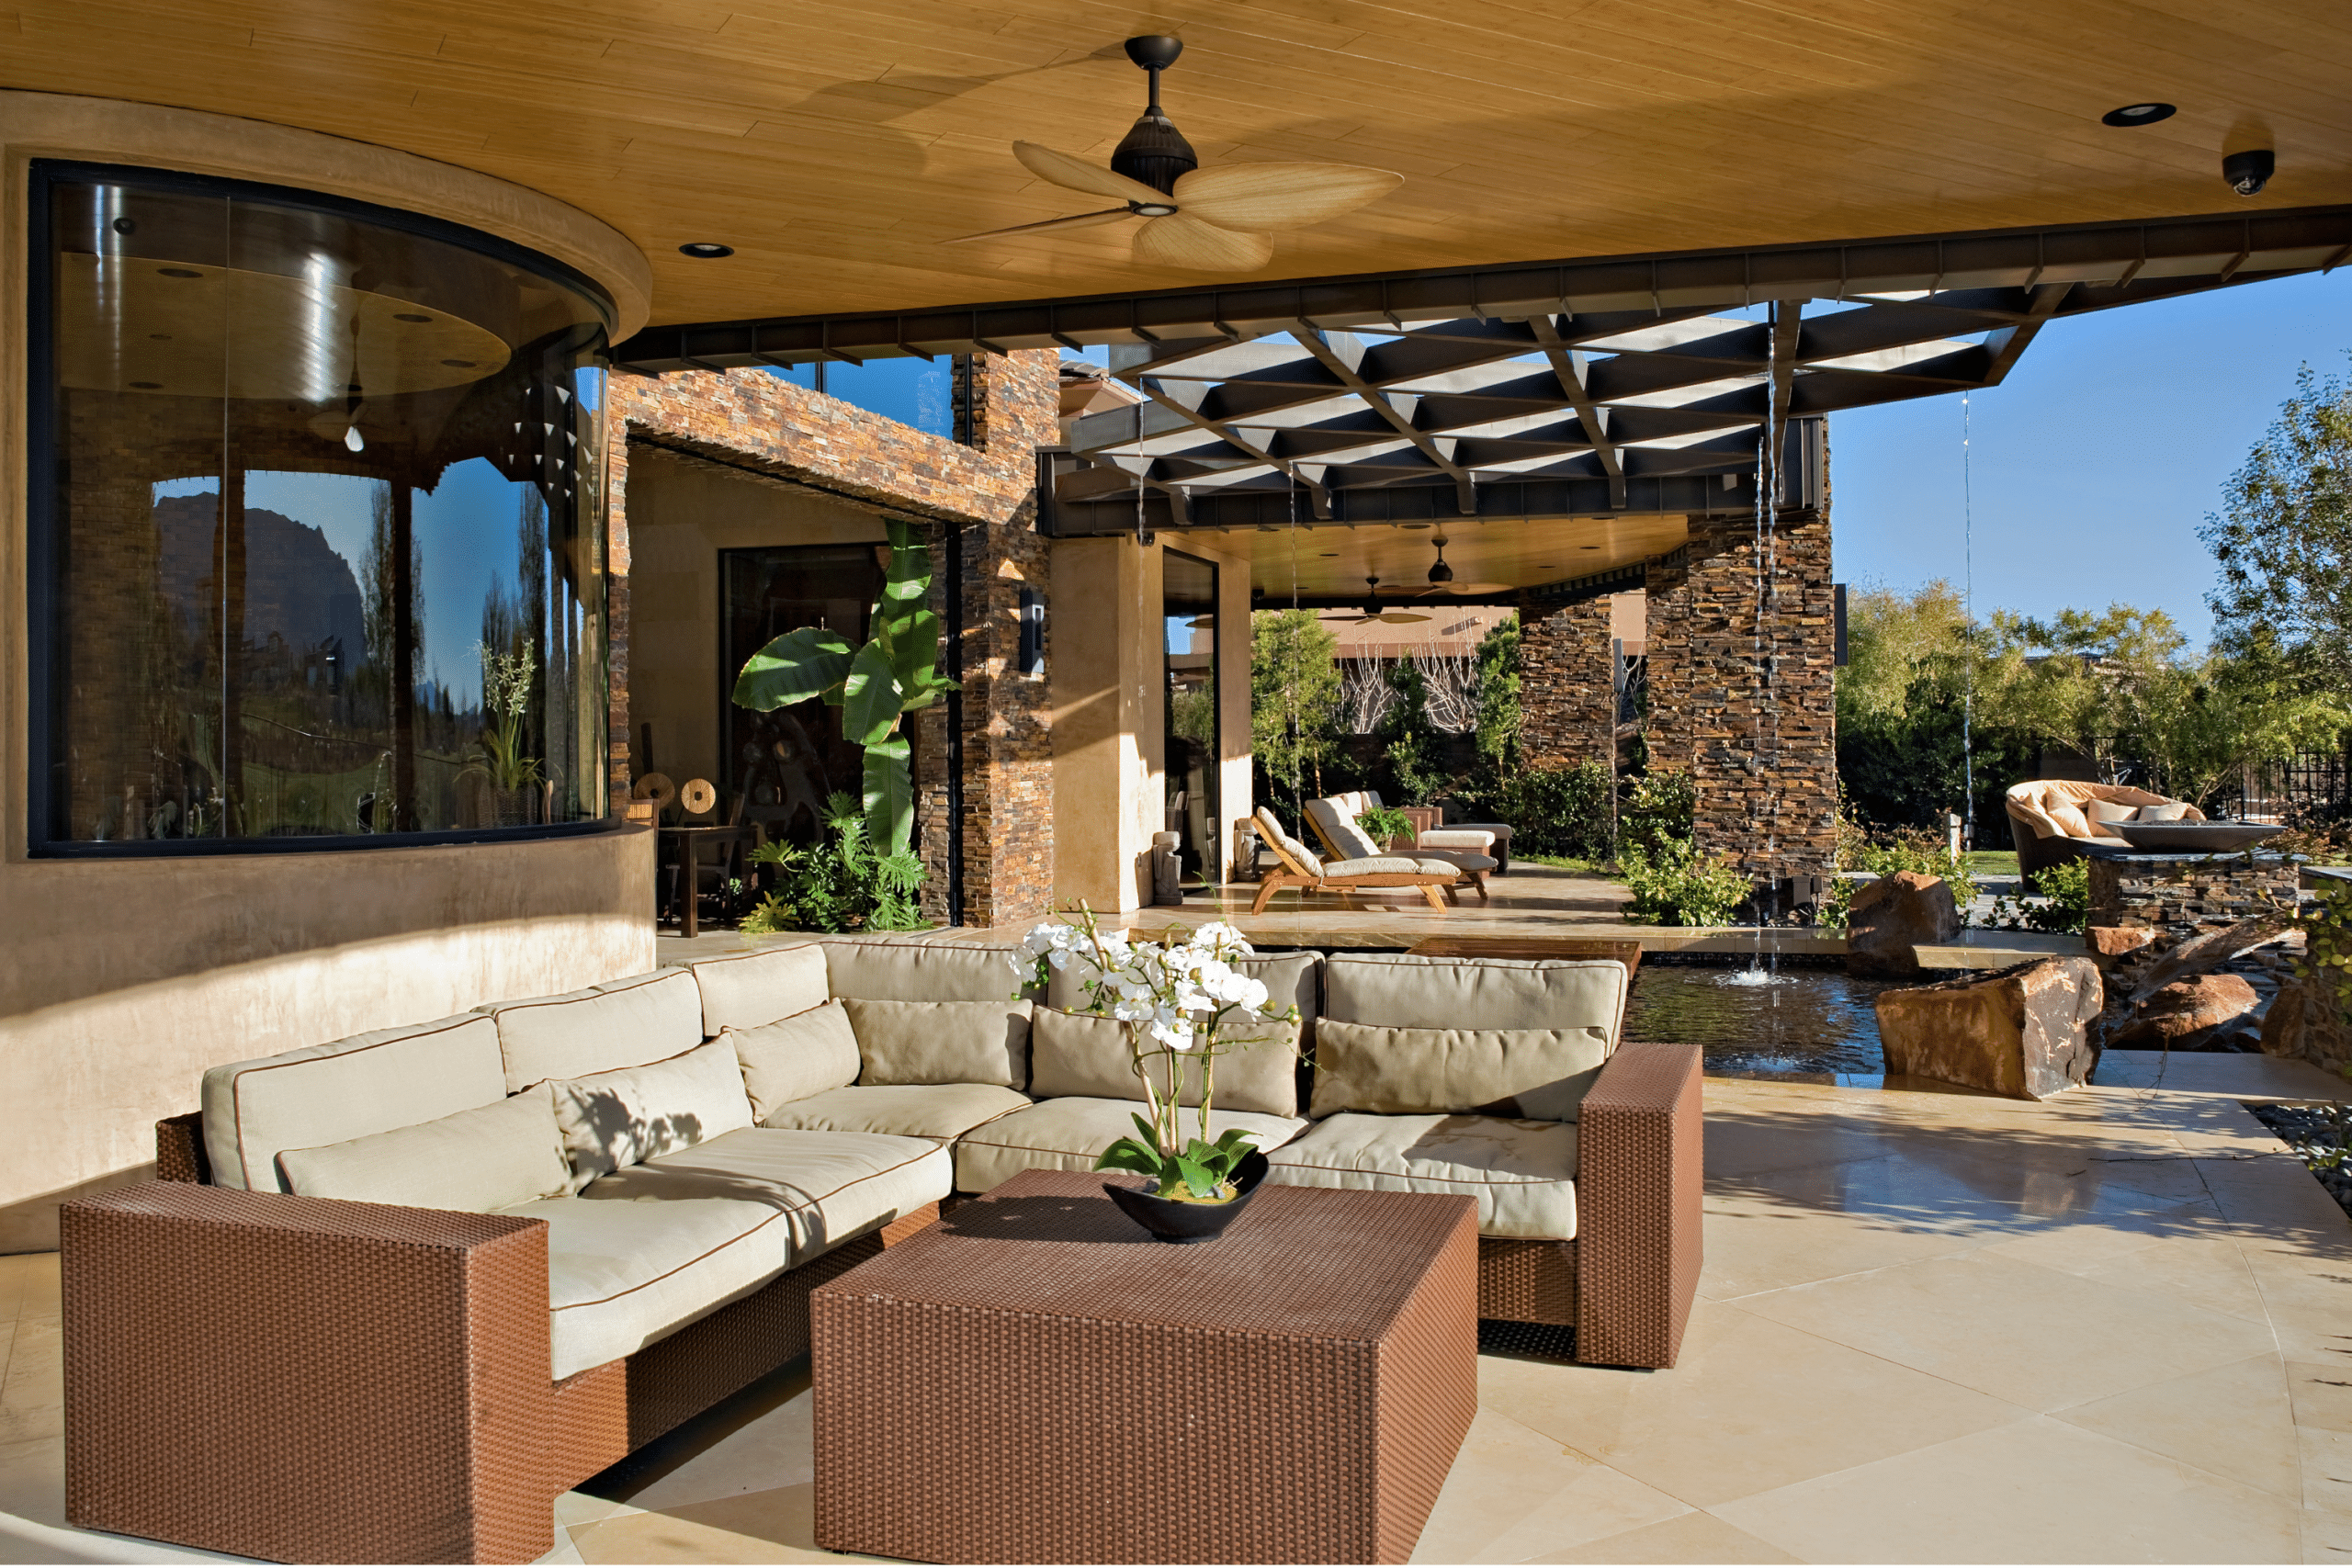 This is an image of a patio with a fountain and a sofa and chairs.